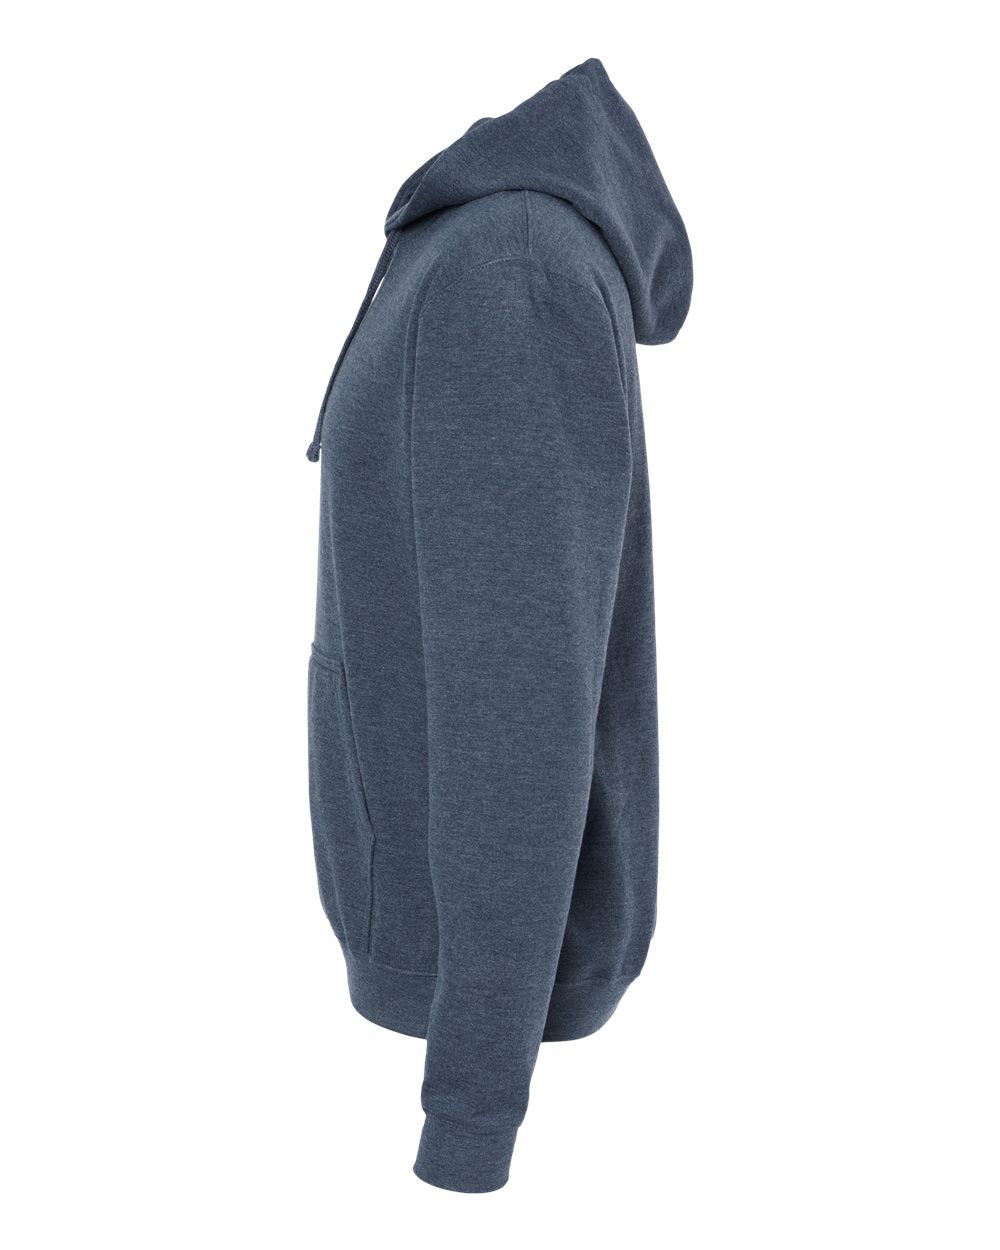 M&O Unisex Pullover Hoodie 3320 #color_Heather Navy